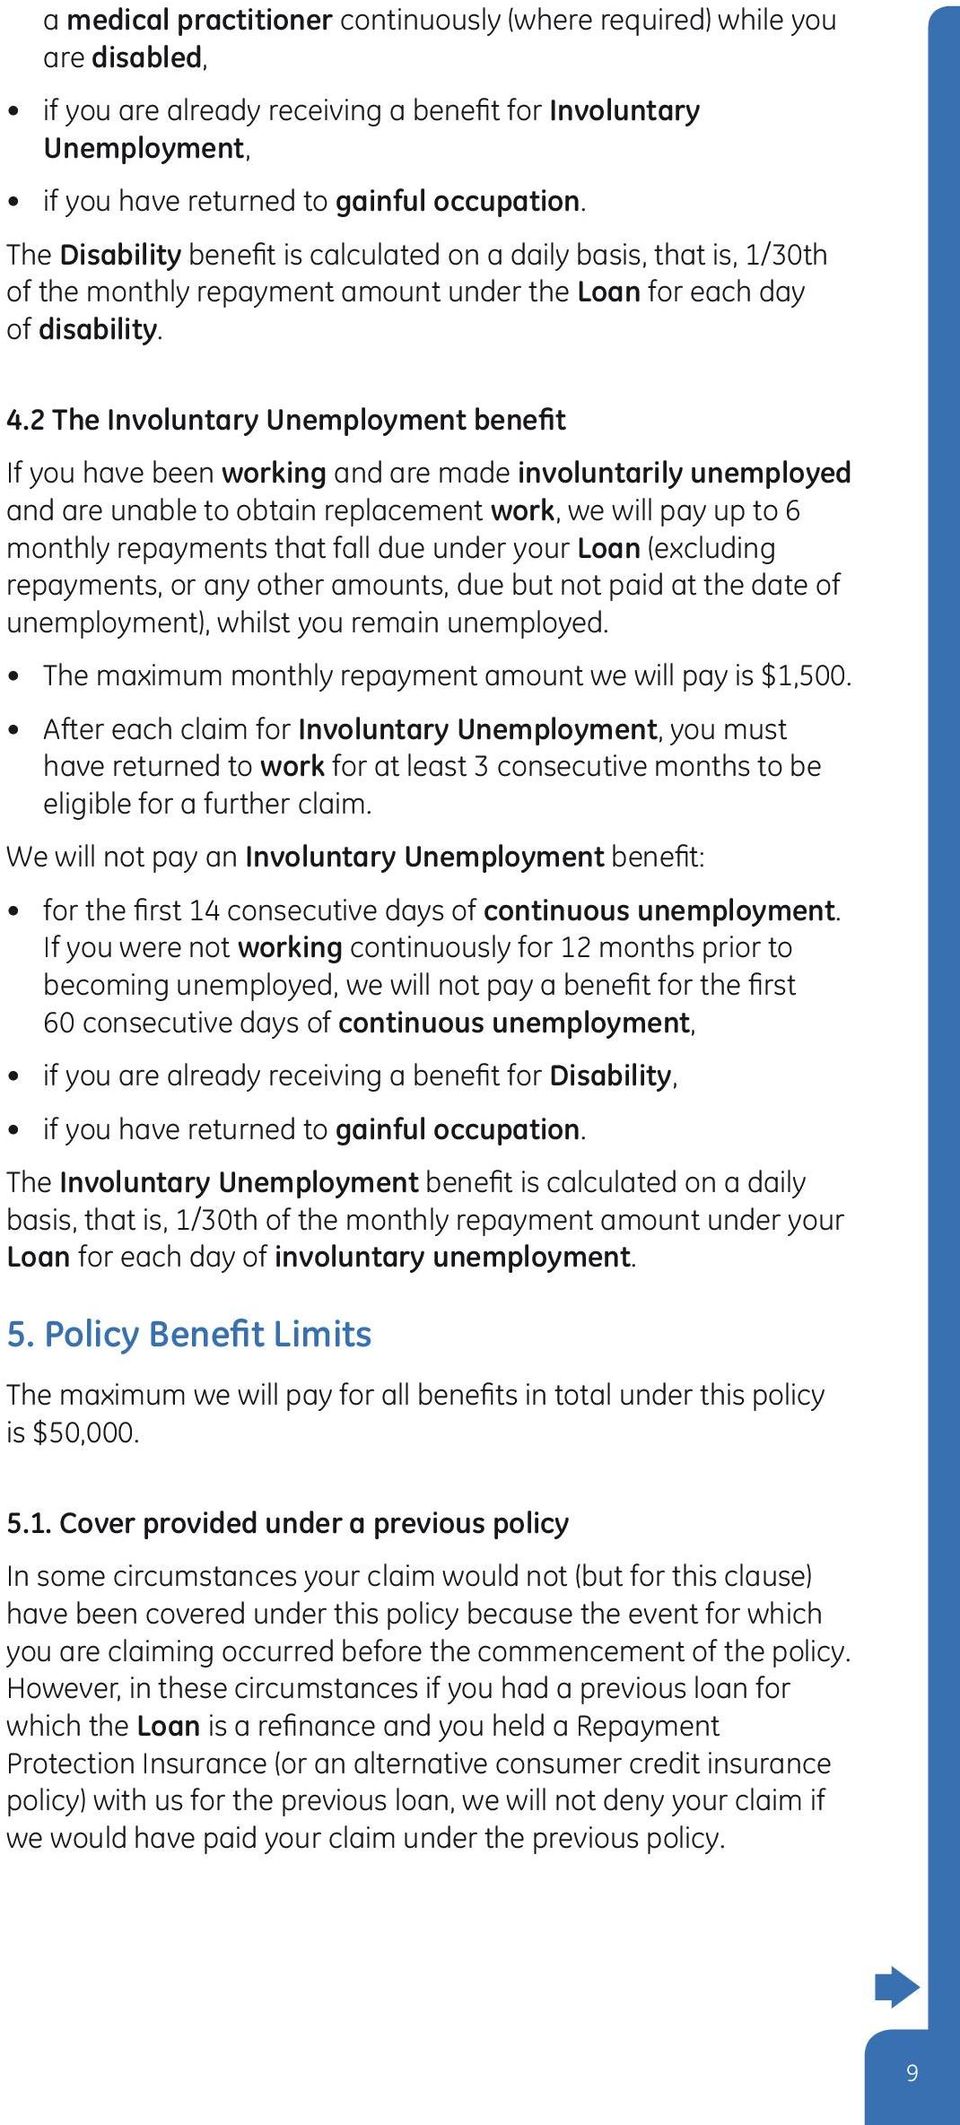 2 The Involuntary Unemployment benefit If you have been working and are made involuntarily unemployed and are unable to obtain replacement work, we will pay up to 6 monthly repayments that fall due